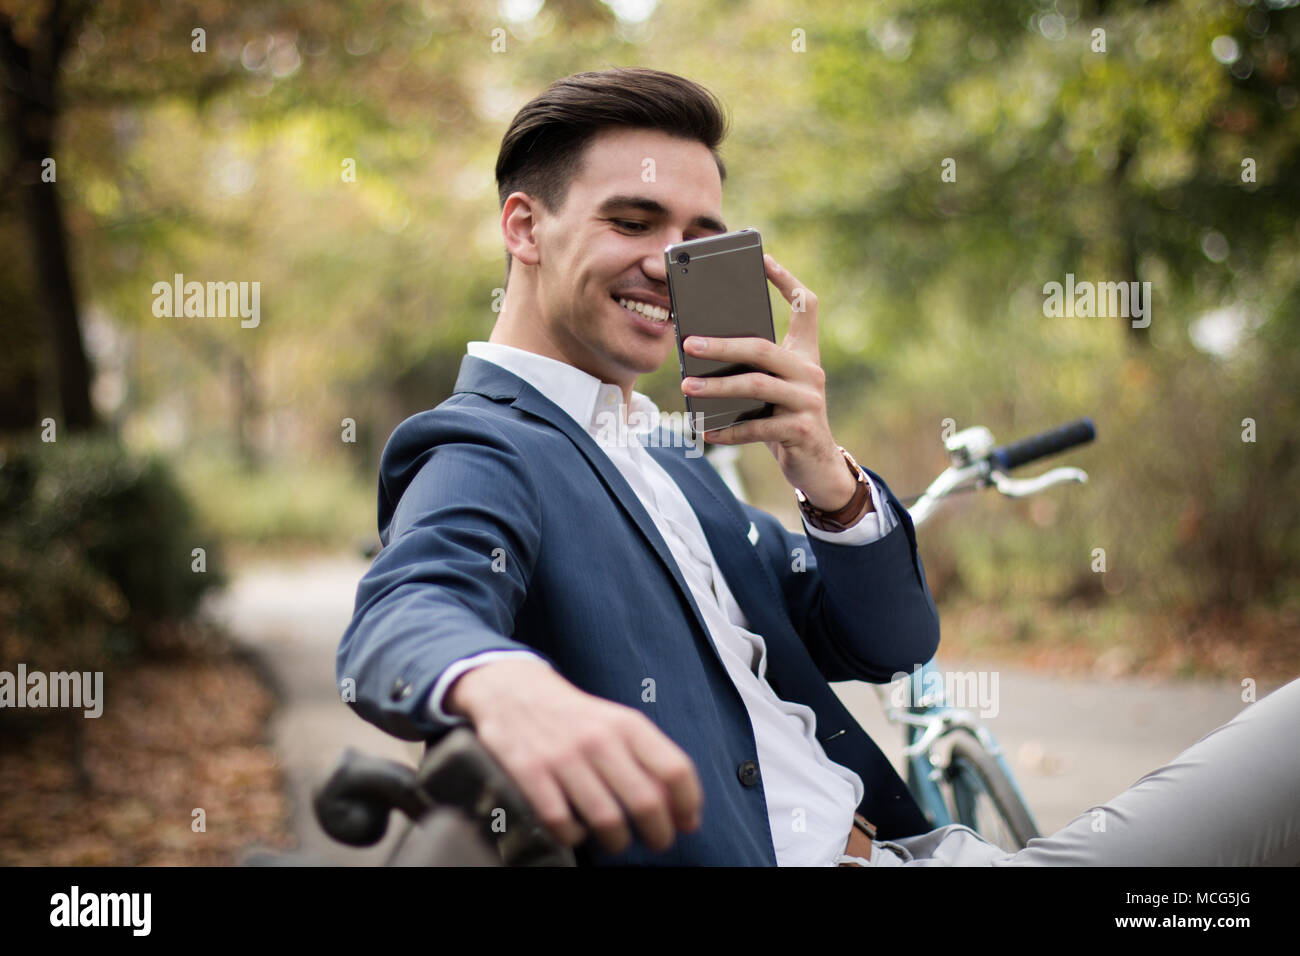 Young attractive and happy businessman taking a picture with his smartphone outdoors in the park. Stock Photo